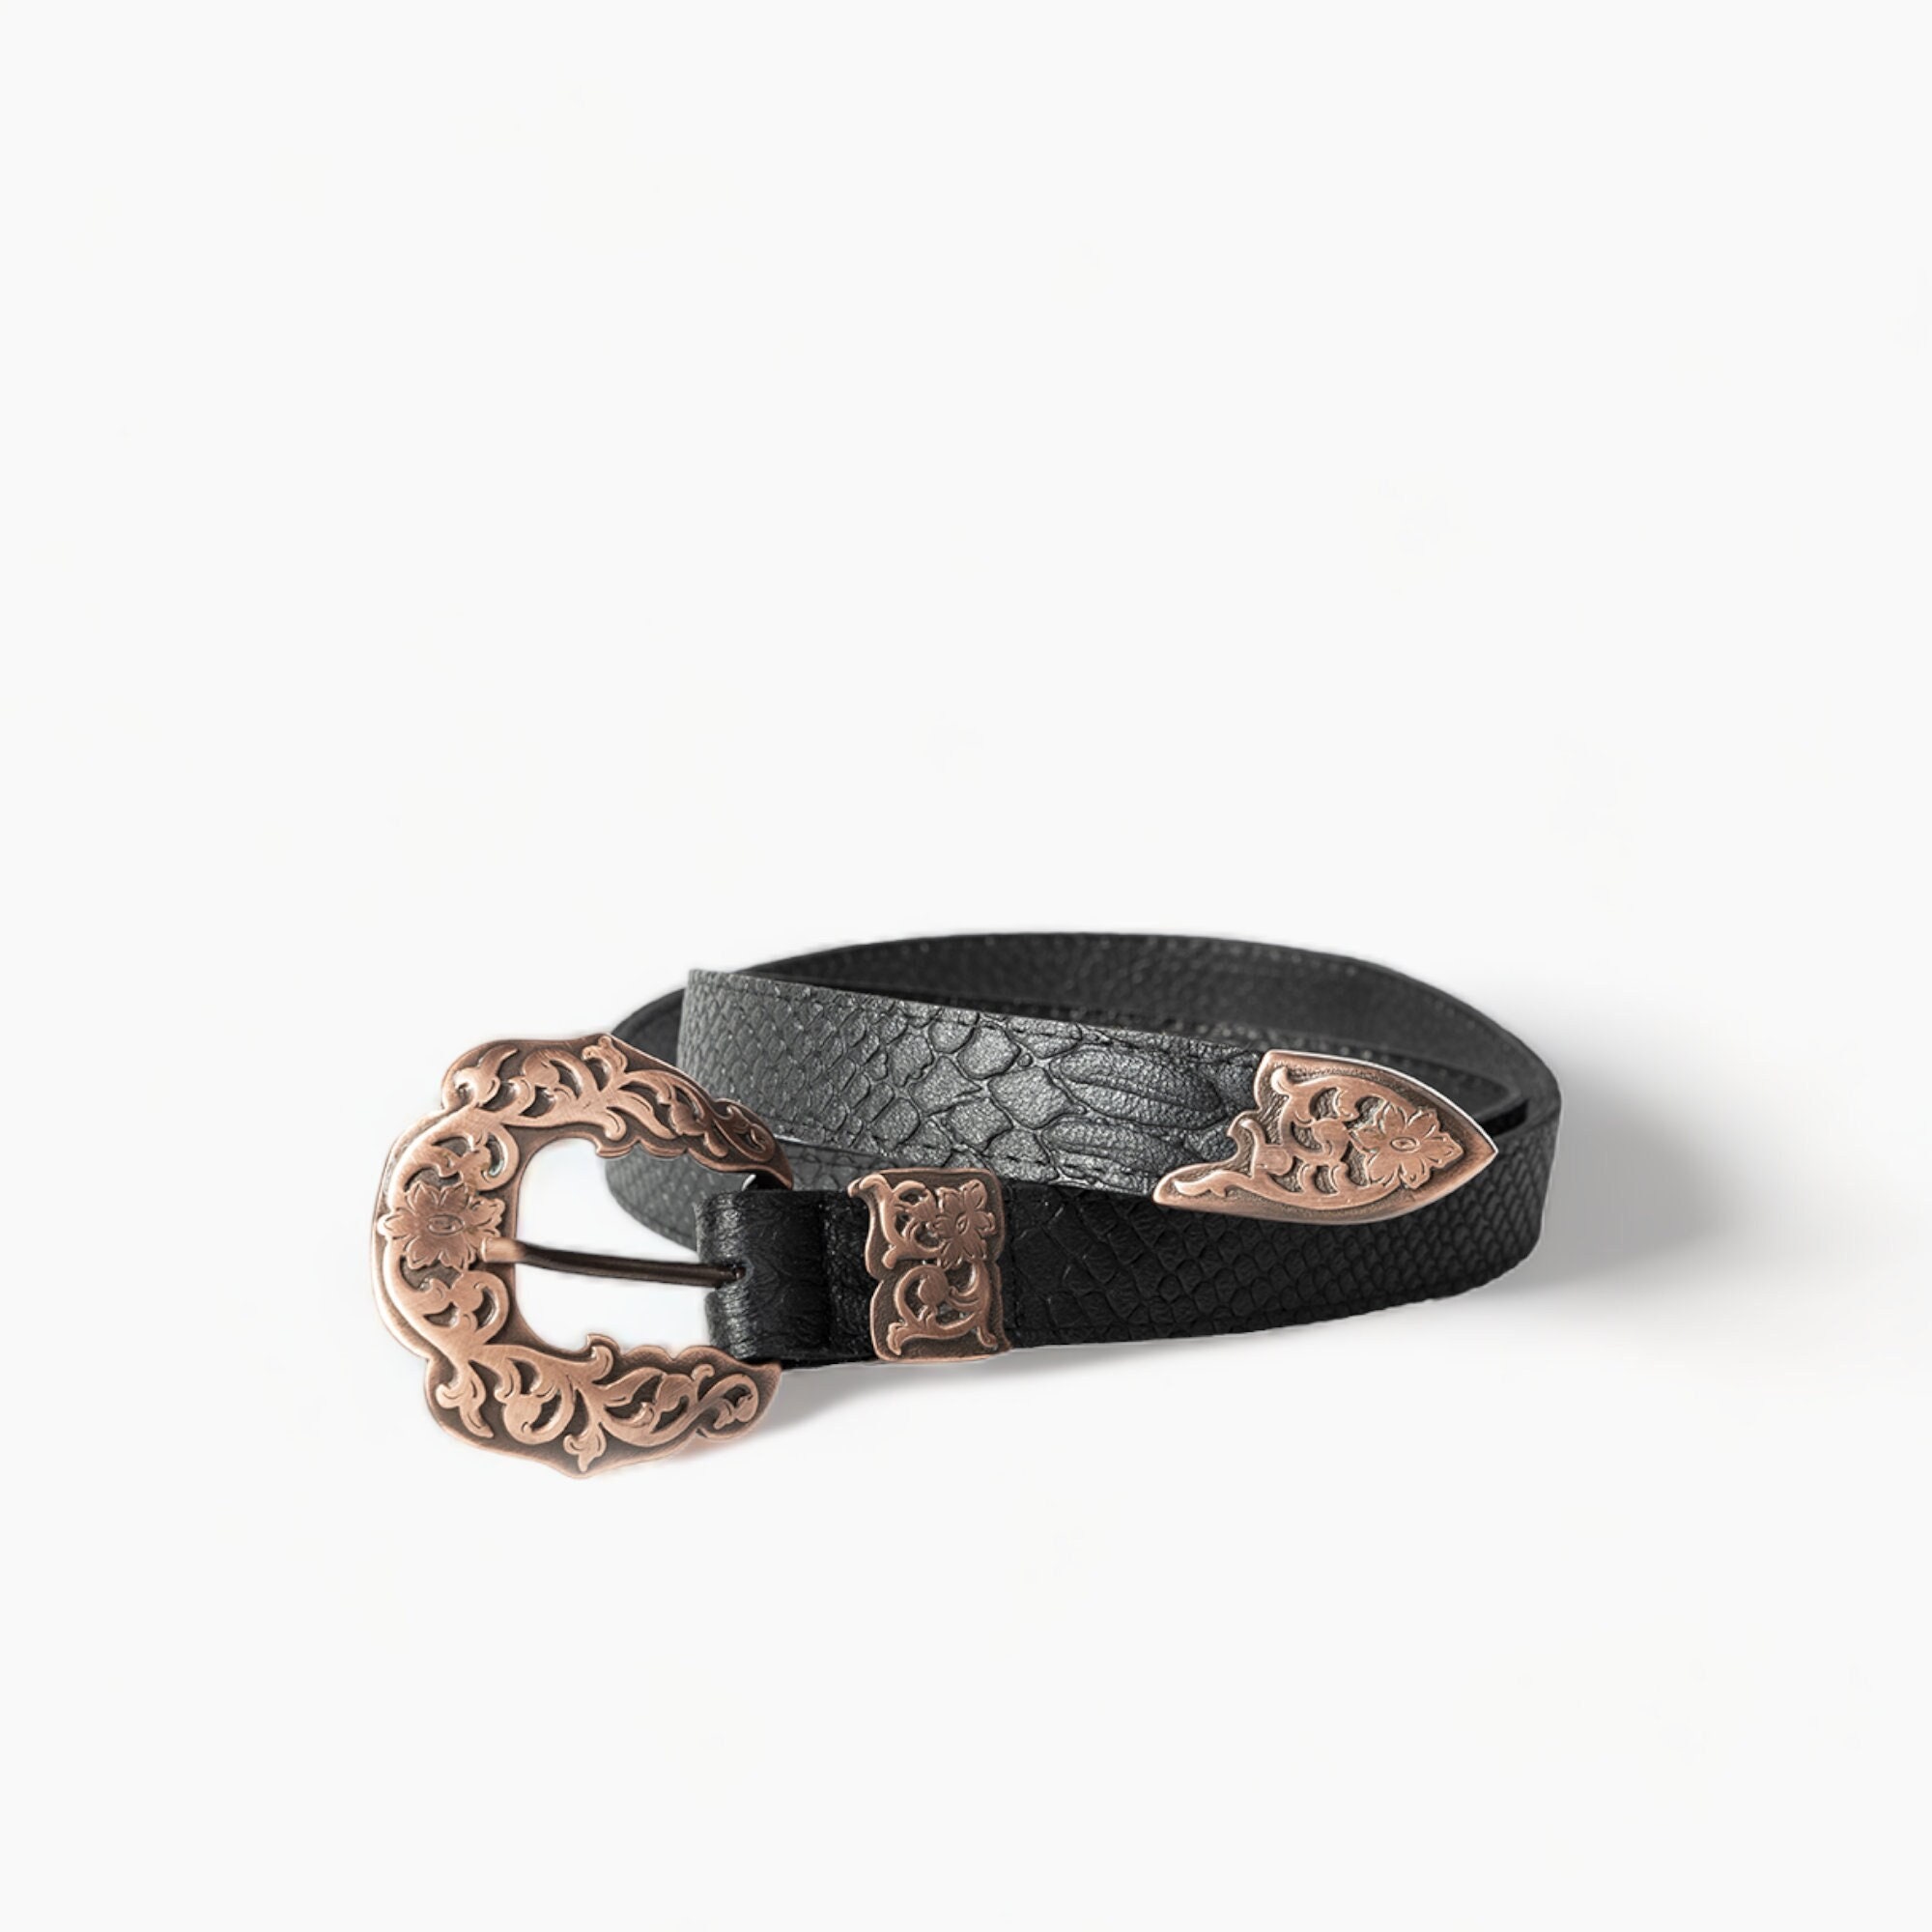 Leather Belt With a Textured Buckle in Black Color -  Hong Kong